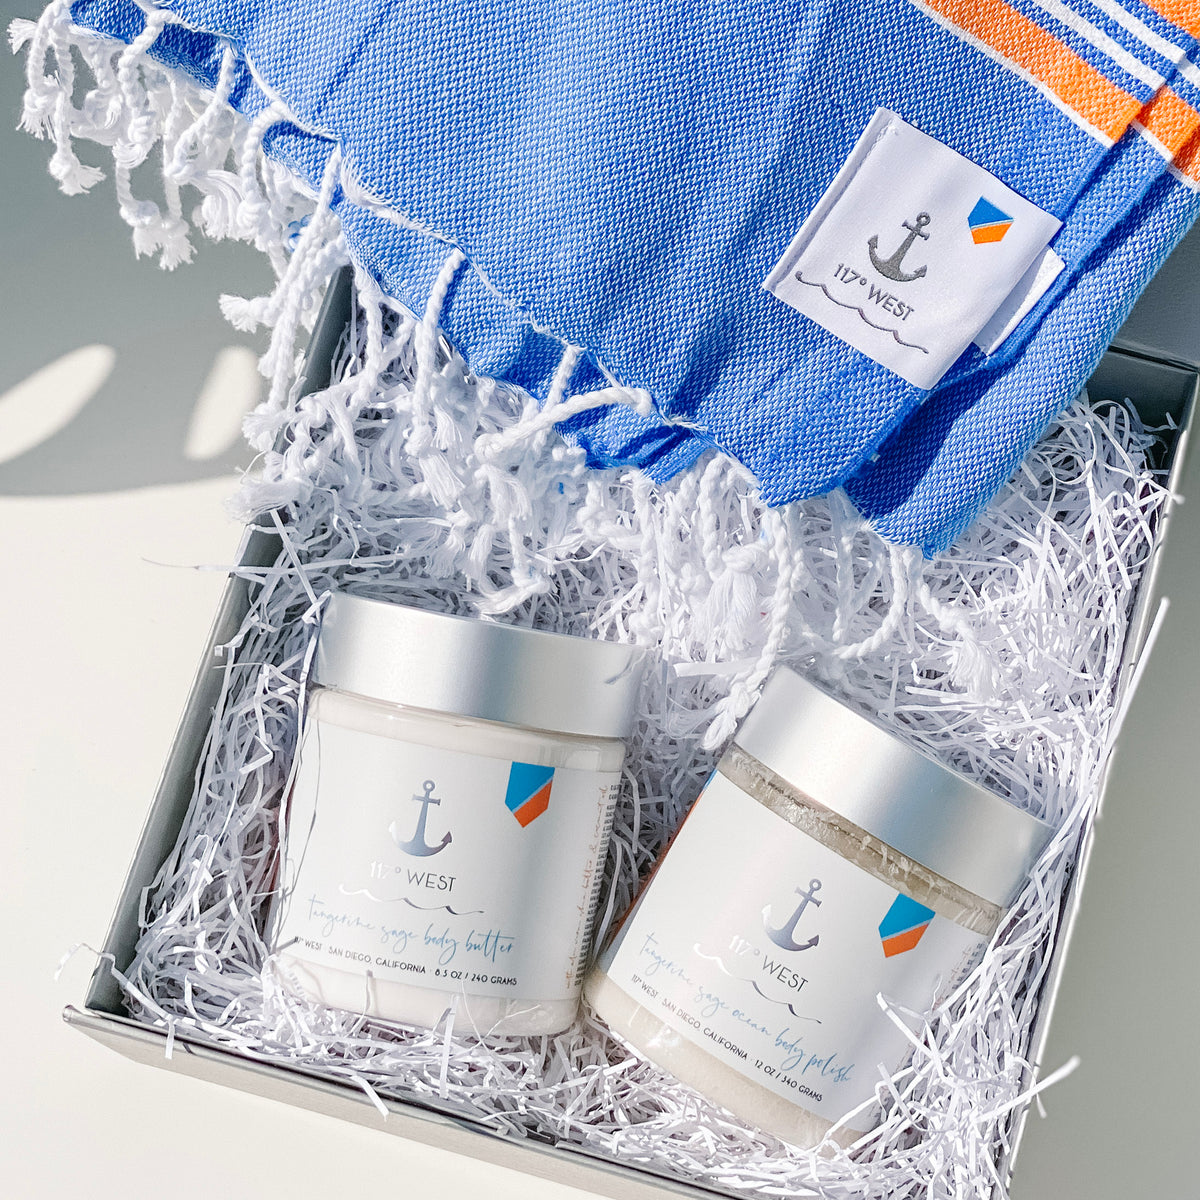 tangerine sage body butter, tangerine sage ocean body polish and a turkish beach towel in a gift box